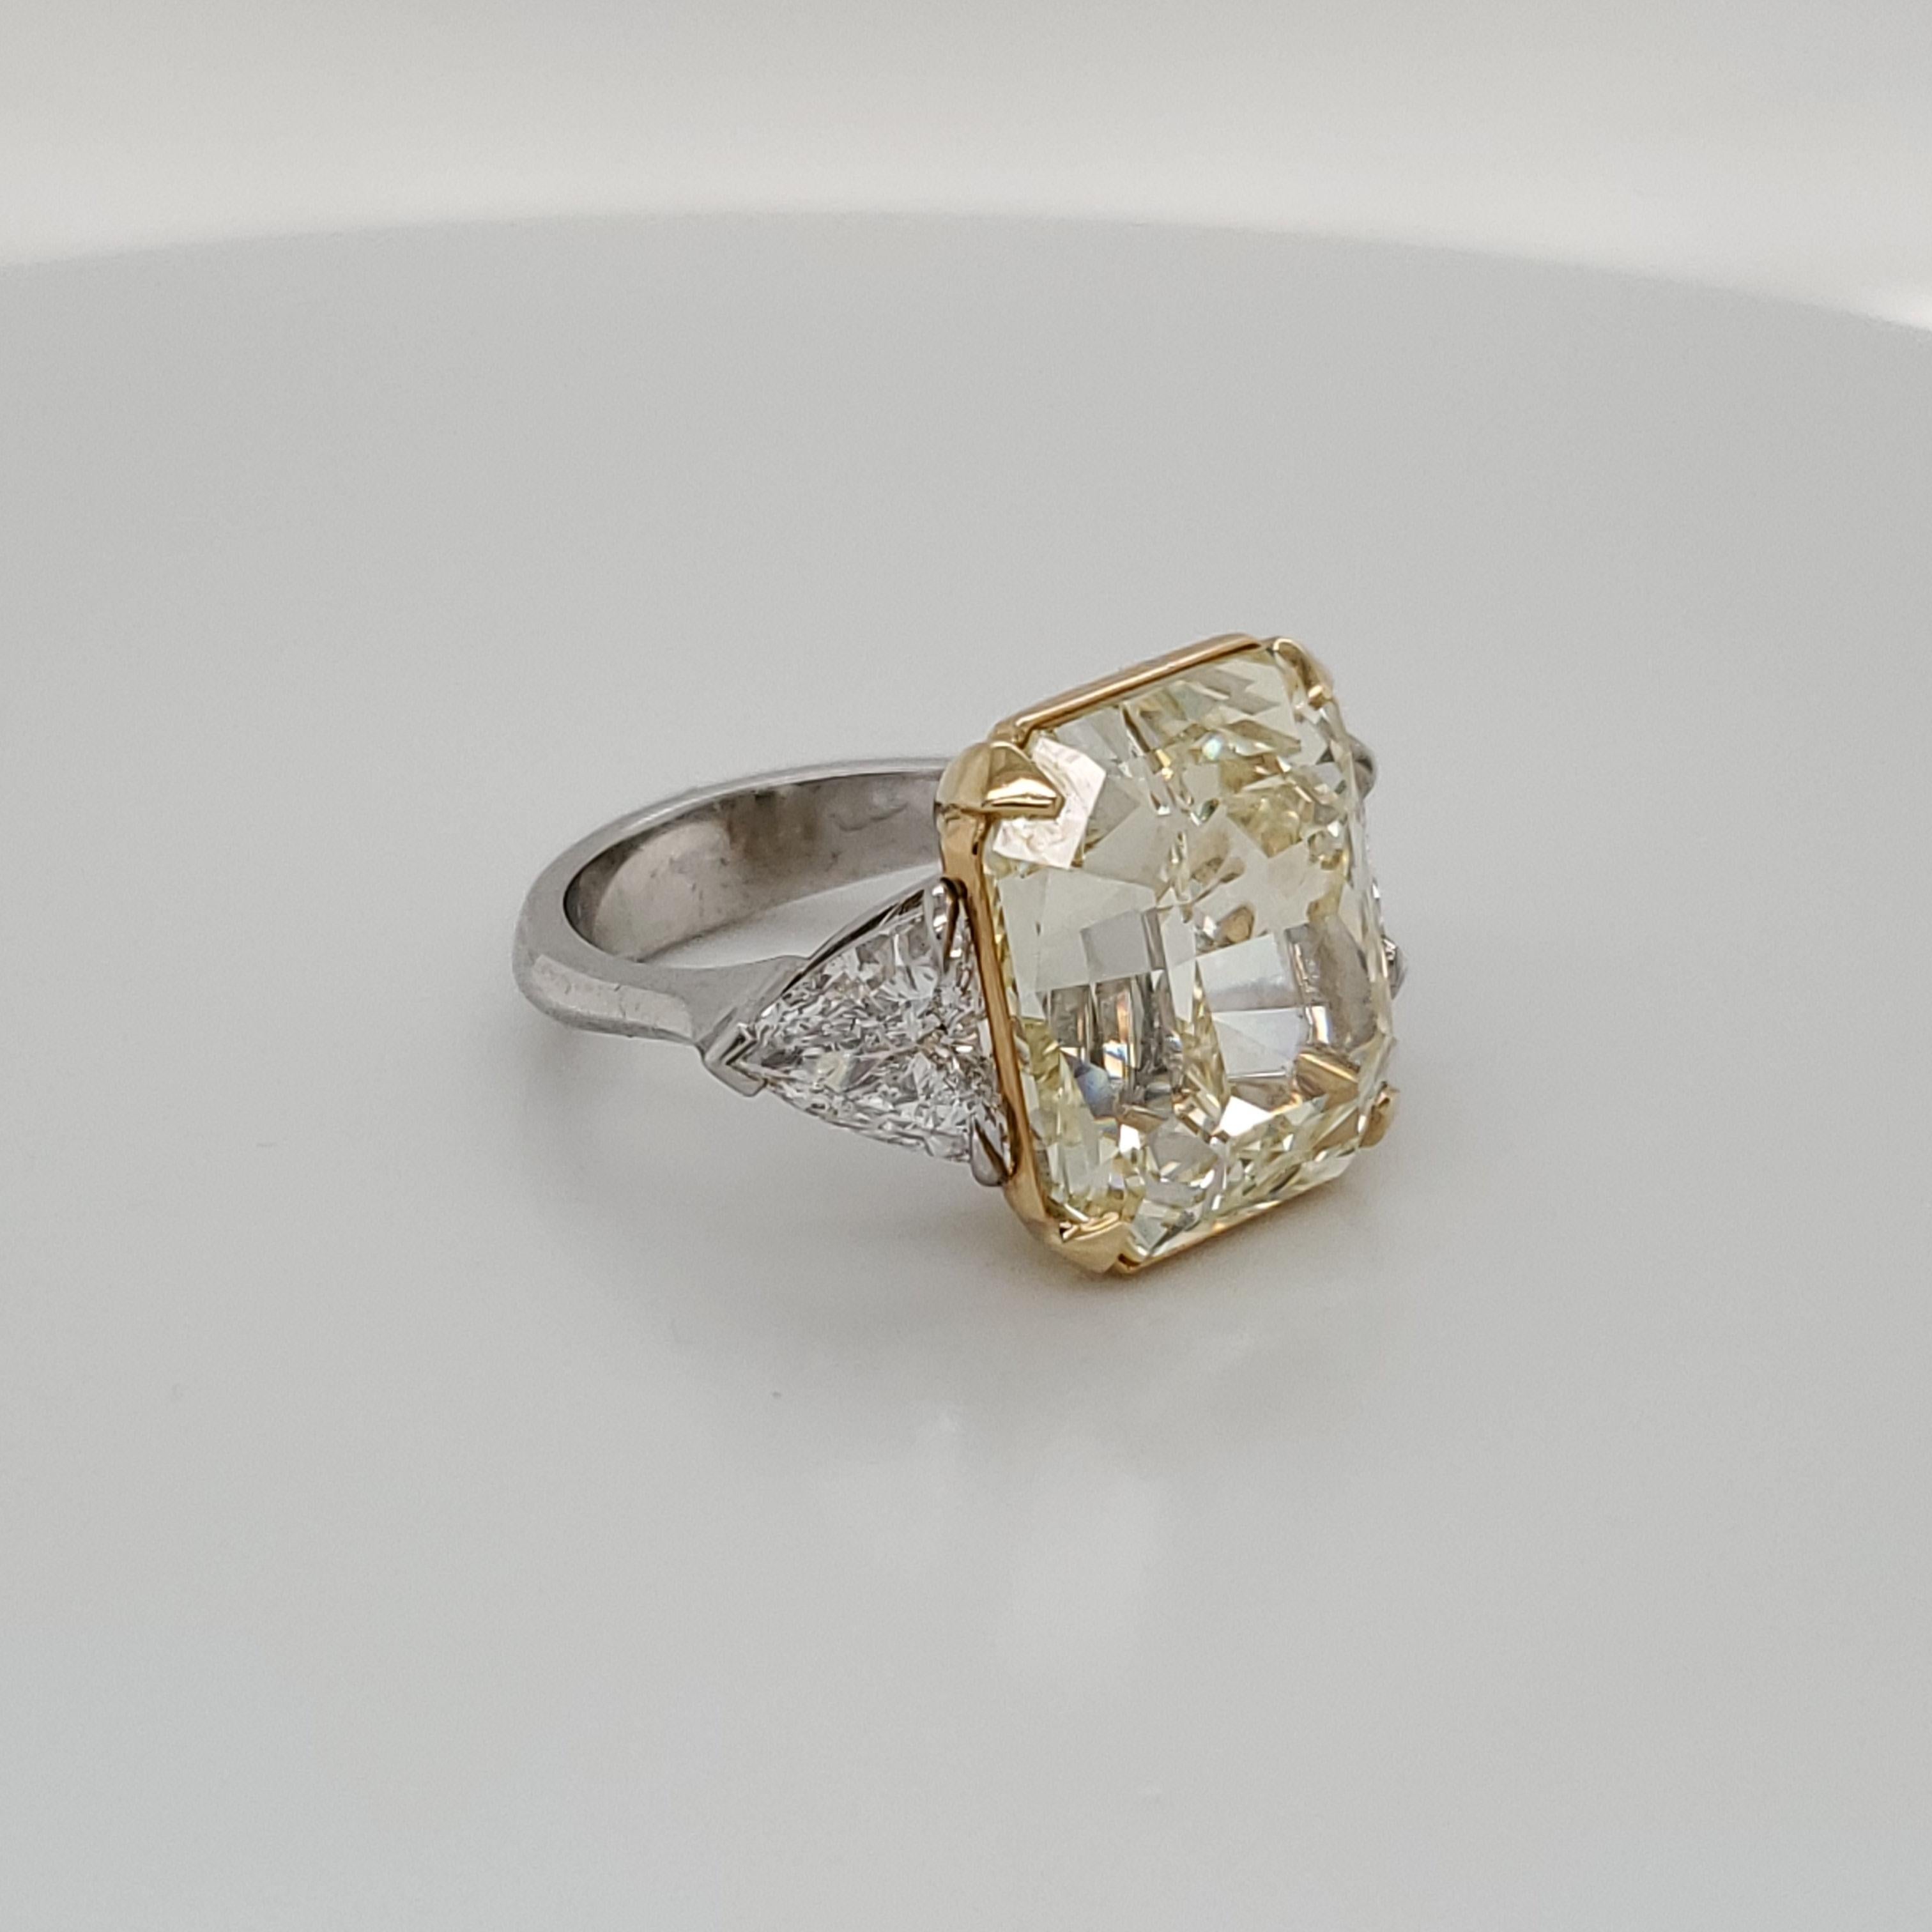 GIA Certified 15.07 Fancy Yellow VS1 center diamond set in Platinum and 18k yellow gold with 2 trillion shaped diamonds weighing about 1.98 carats total 